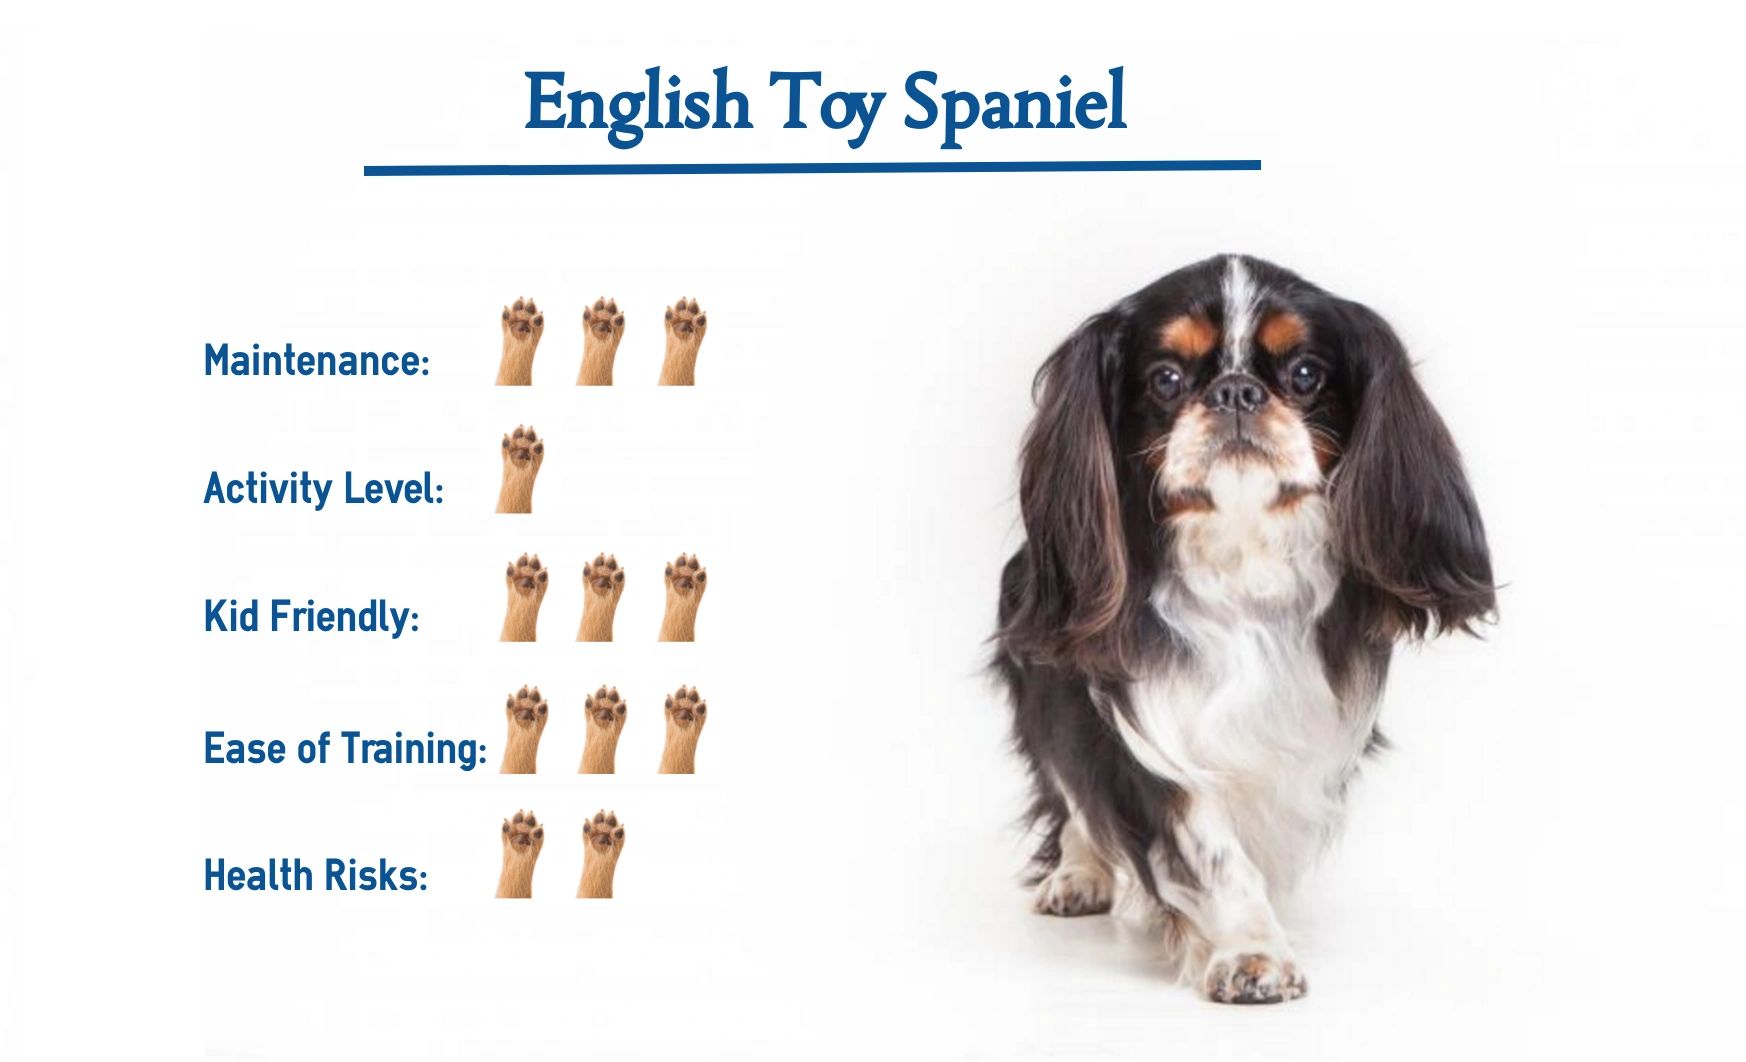 Back to Basics: A Comparison of the English Toy Spaniel and the Cavali